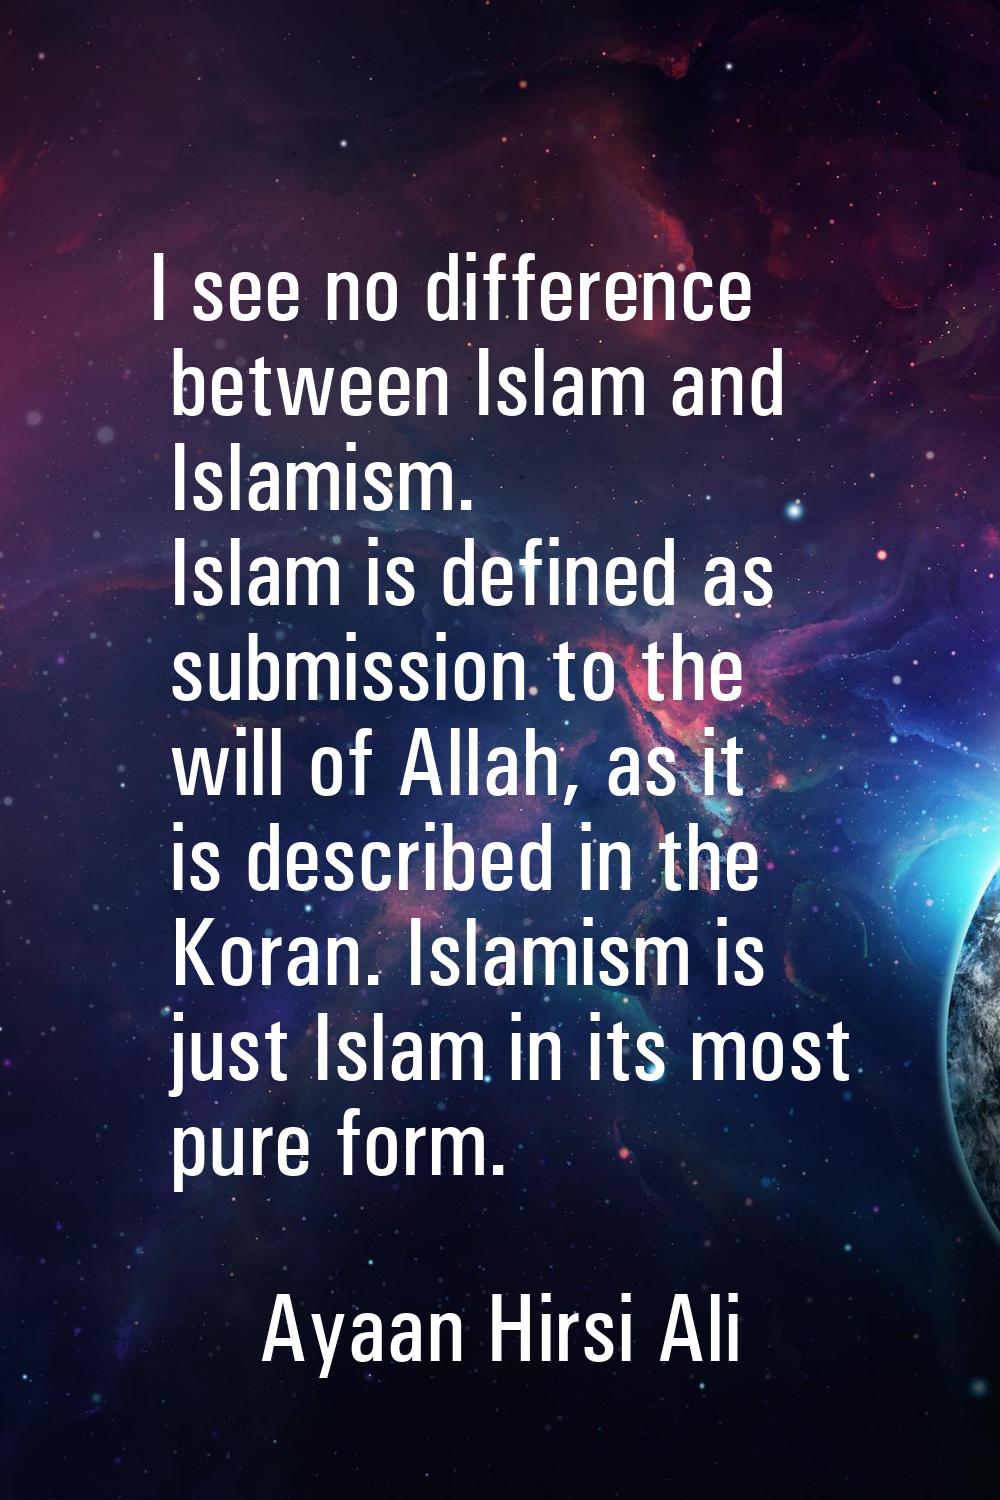 I see no difference between Islam and Islamism. Islam is defined as submission to the will of Allah